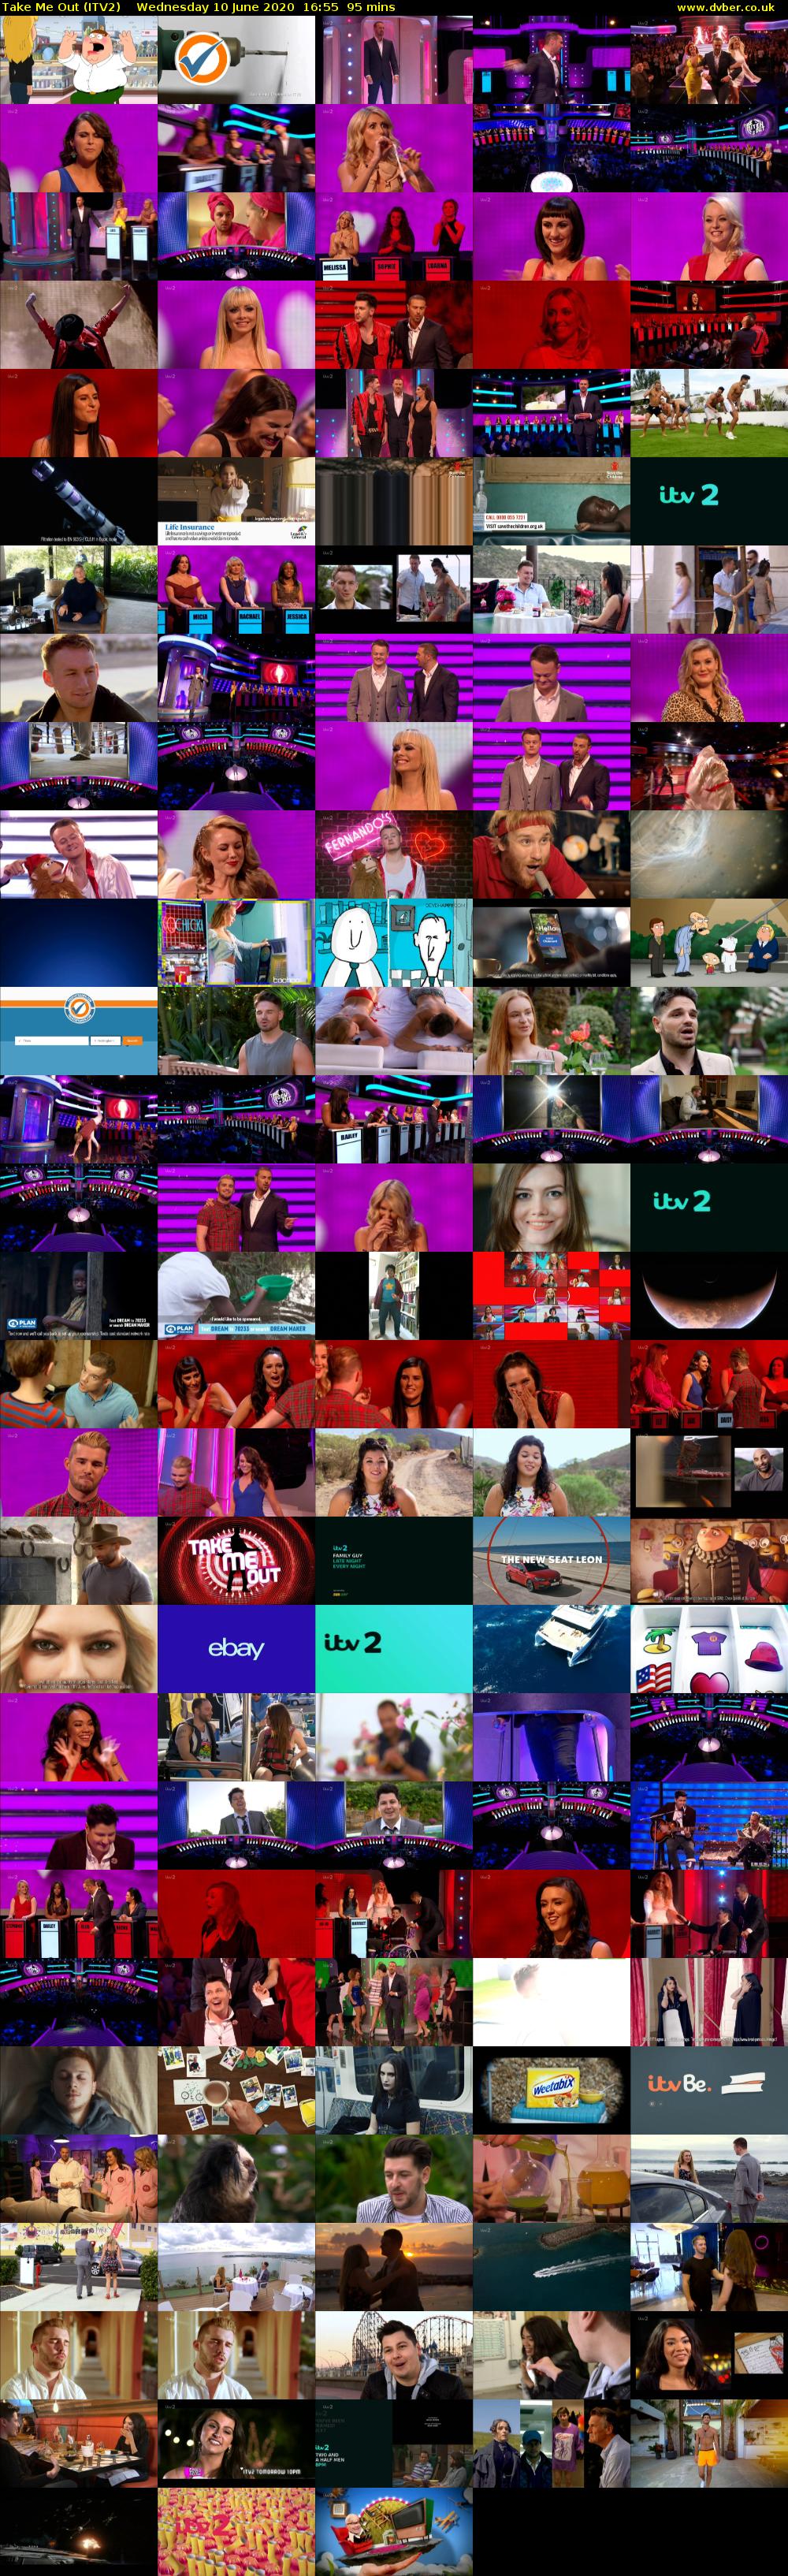 Take Me Out (ITV2) Wednesday 10 June 2020 16:55 - 18:30